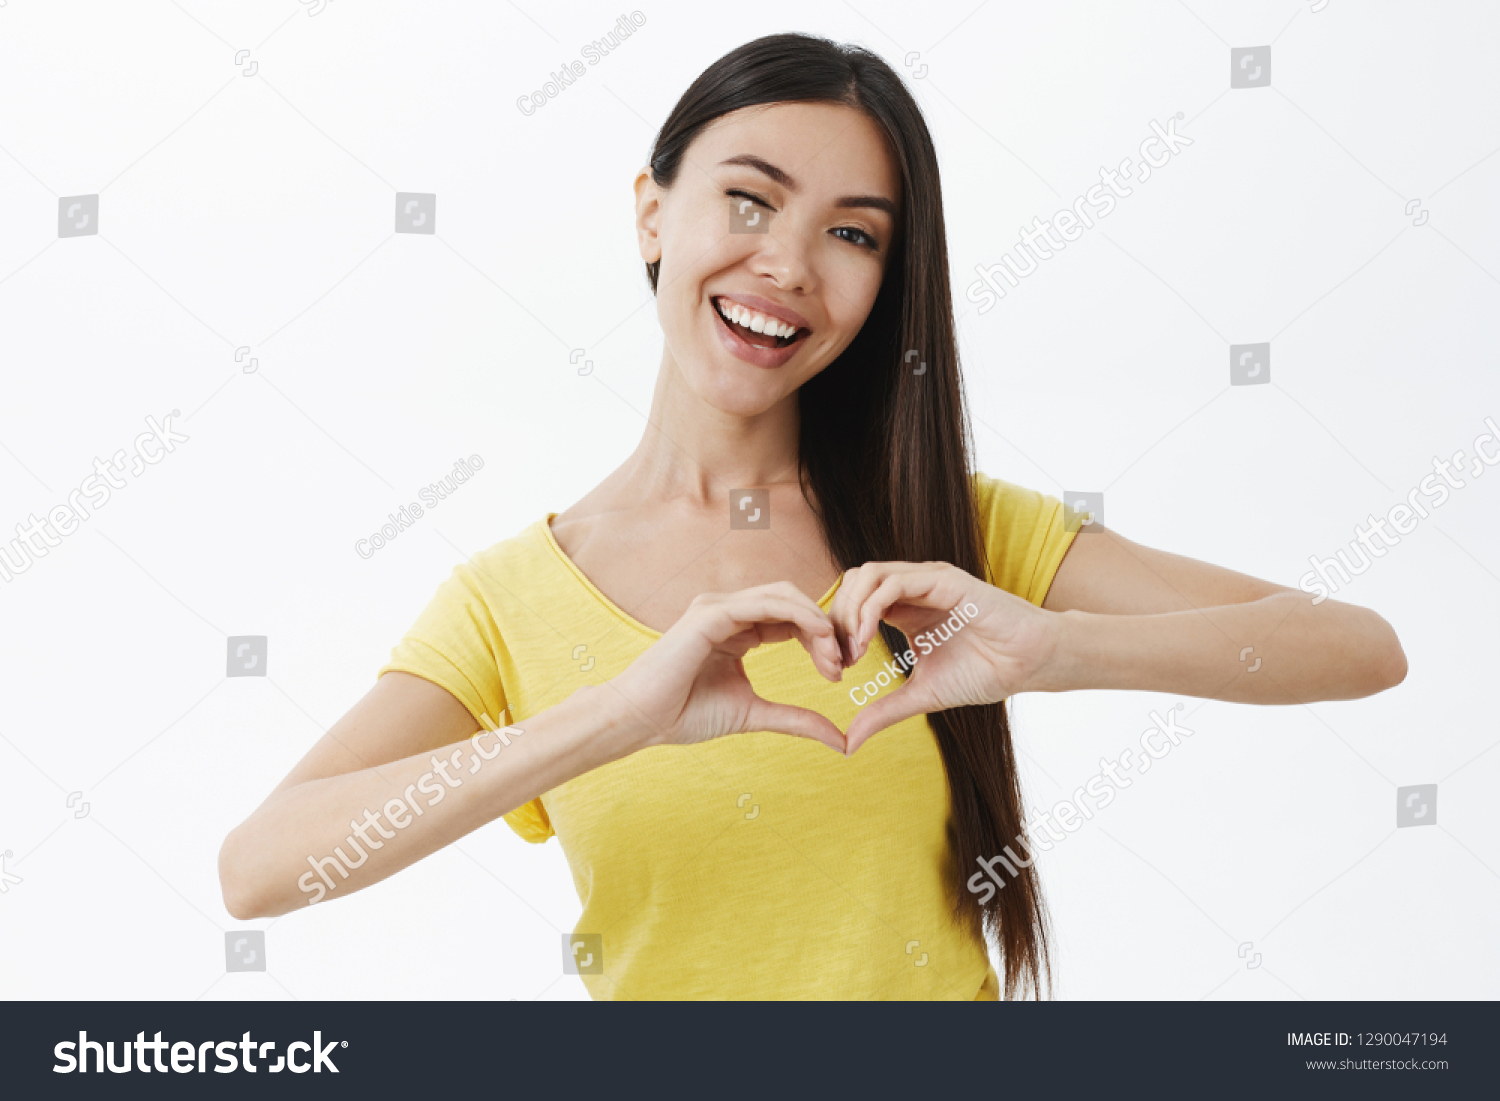 Waist-up shot of cute caring and happy girlfriend with lond dark hair winking joyfully smiling showing heart gesture over chest expressing love and affection being tender and friendly over grey wall #1290047194